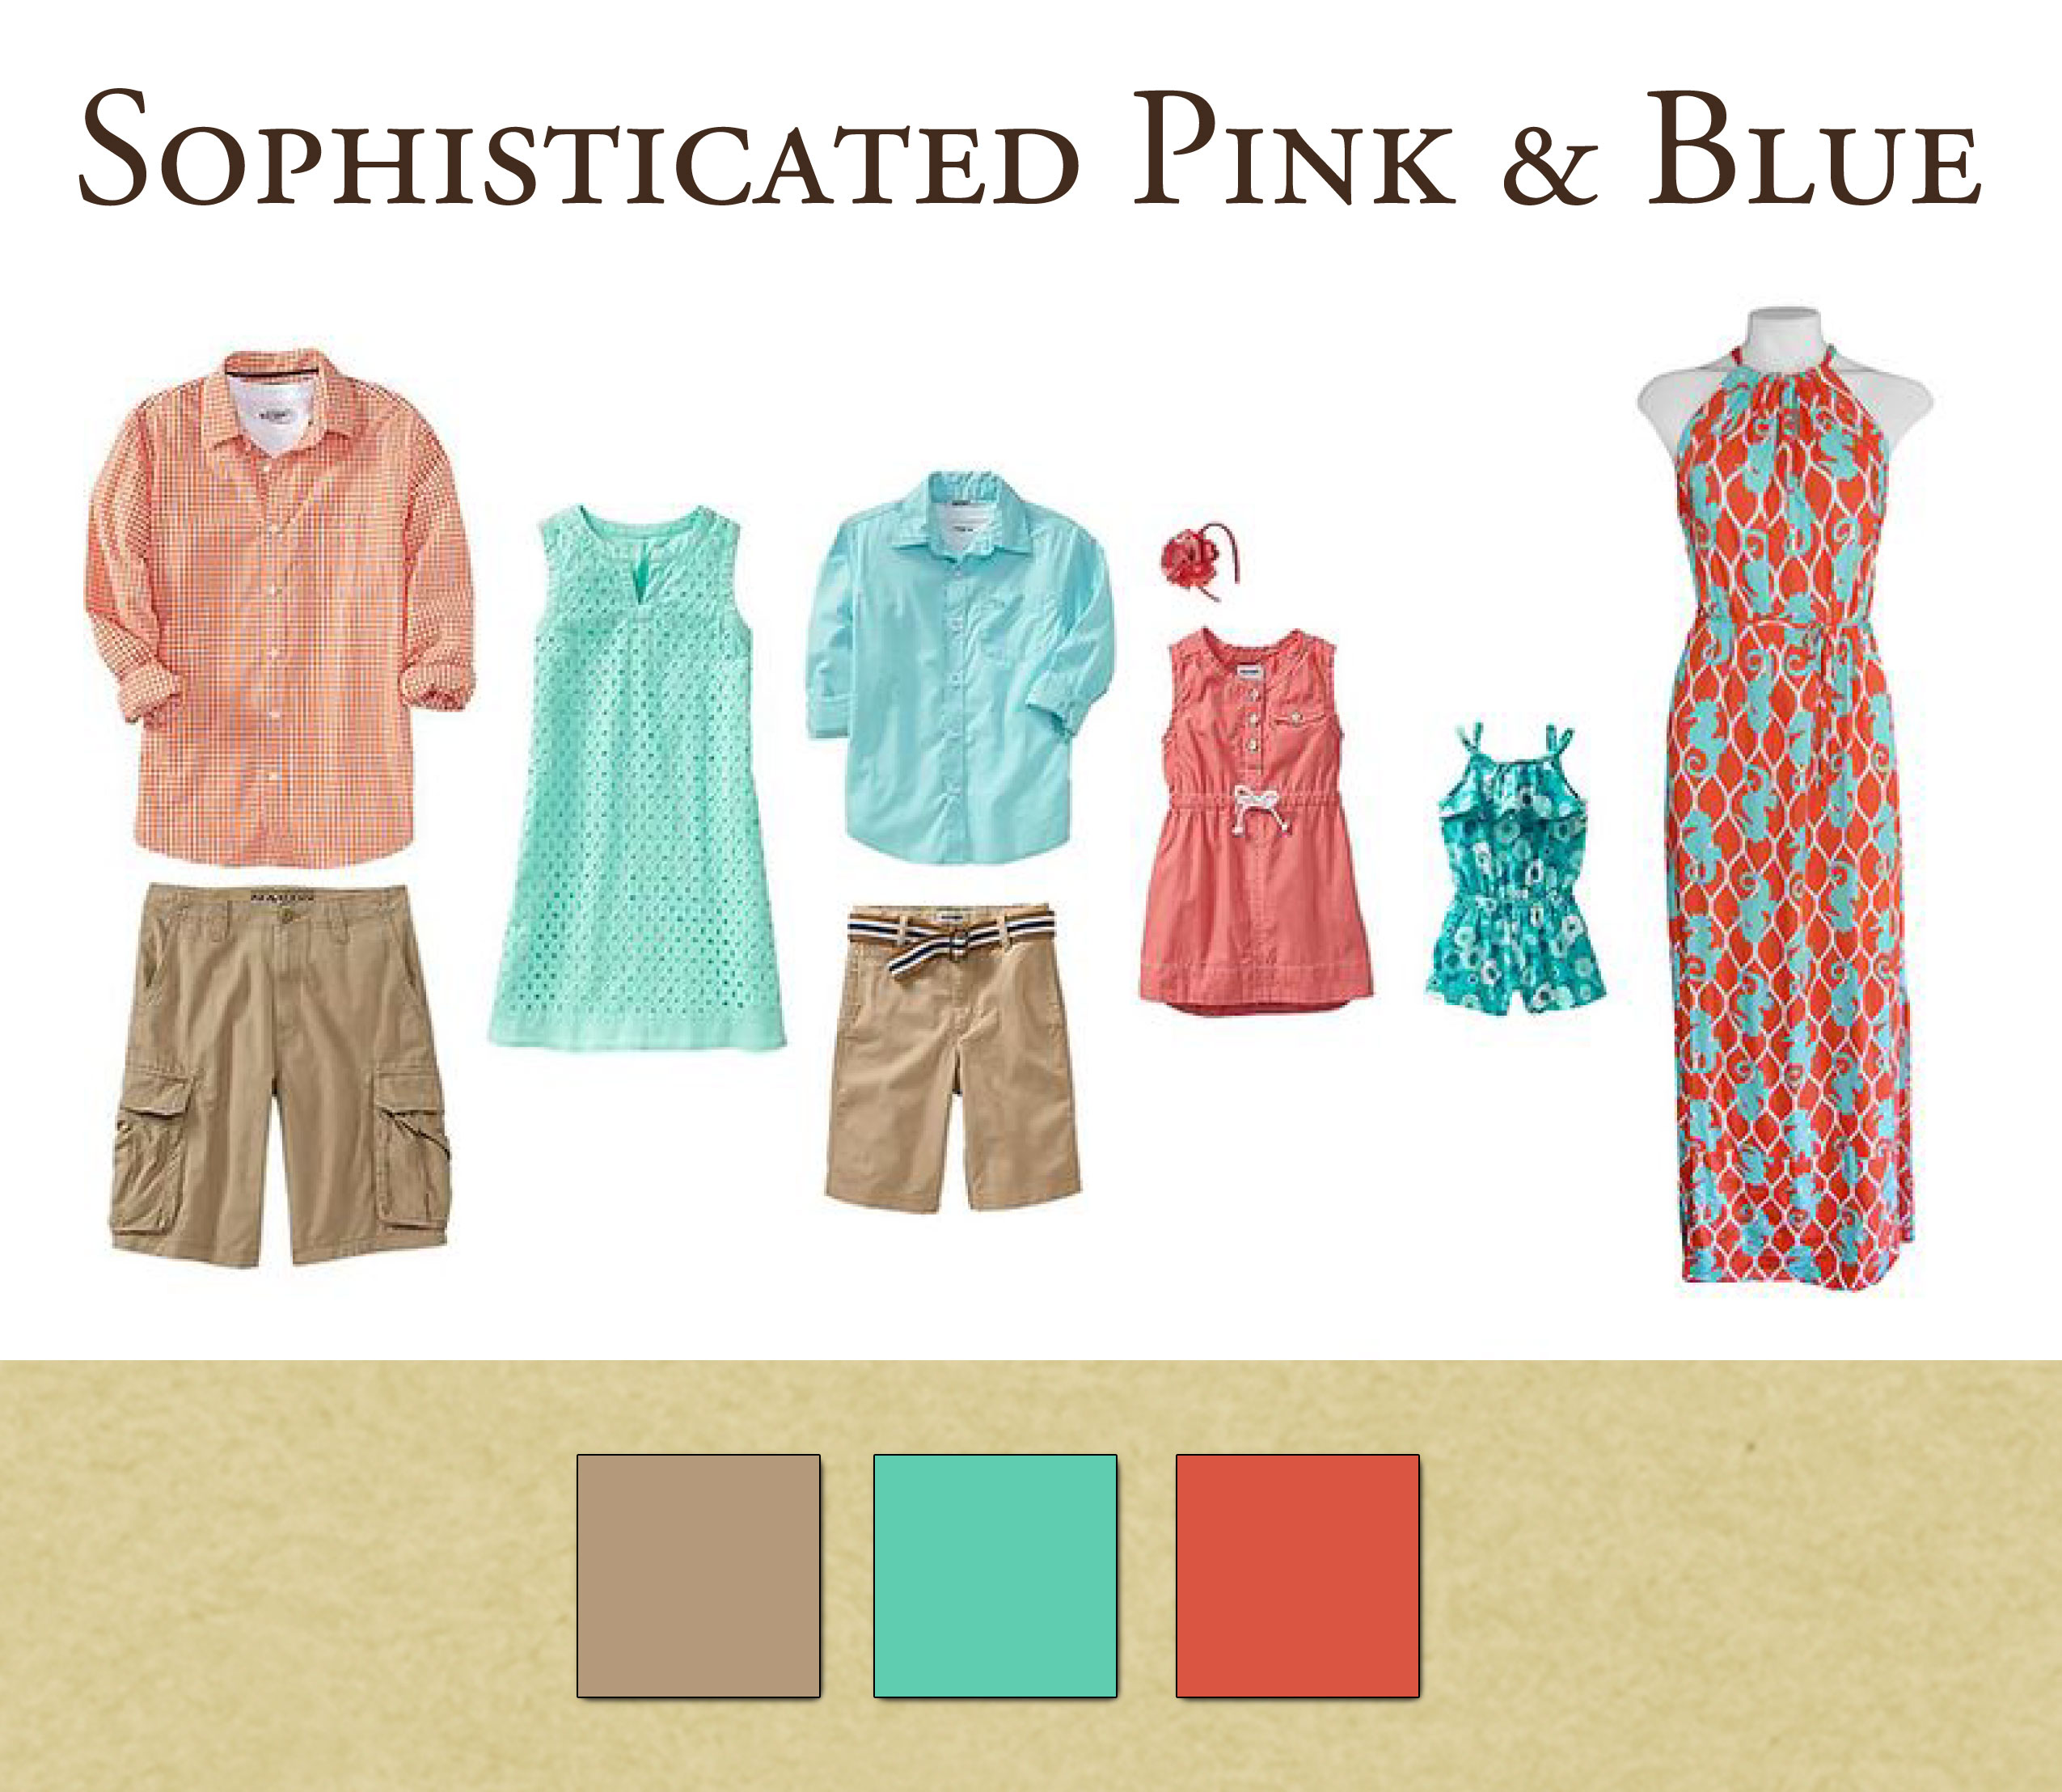 Family Outfits: Sophisticated Pink & Blue